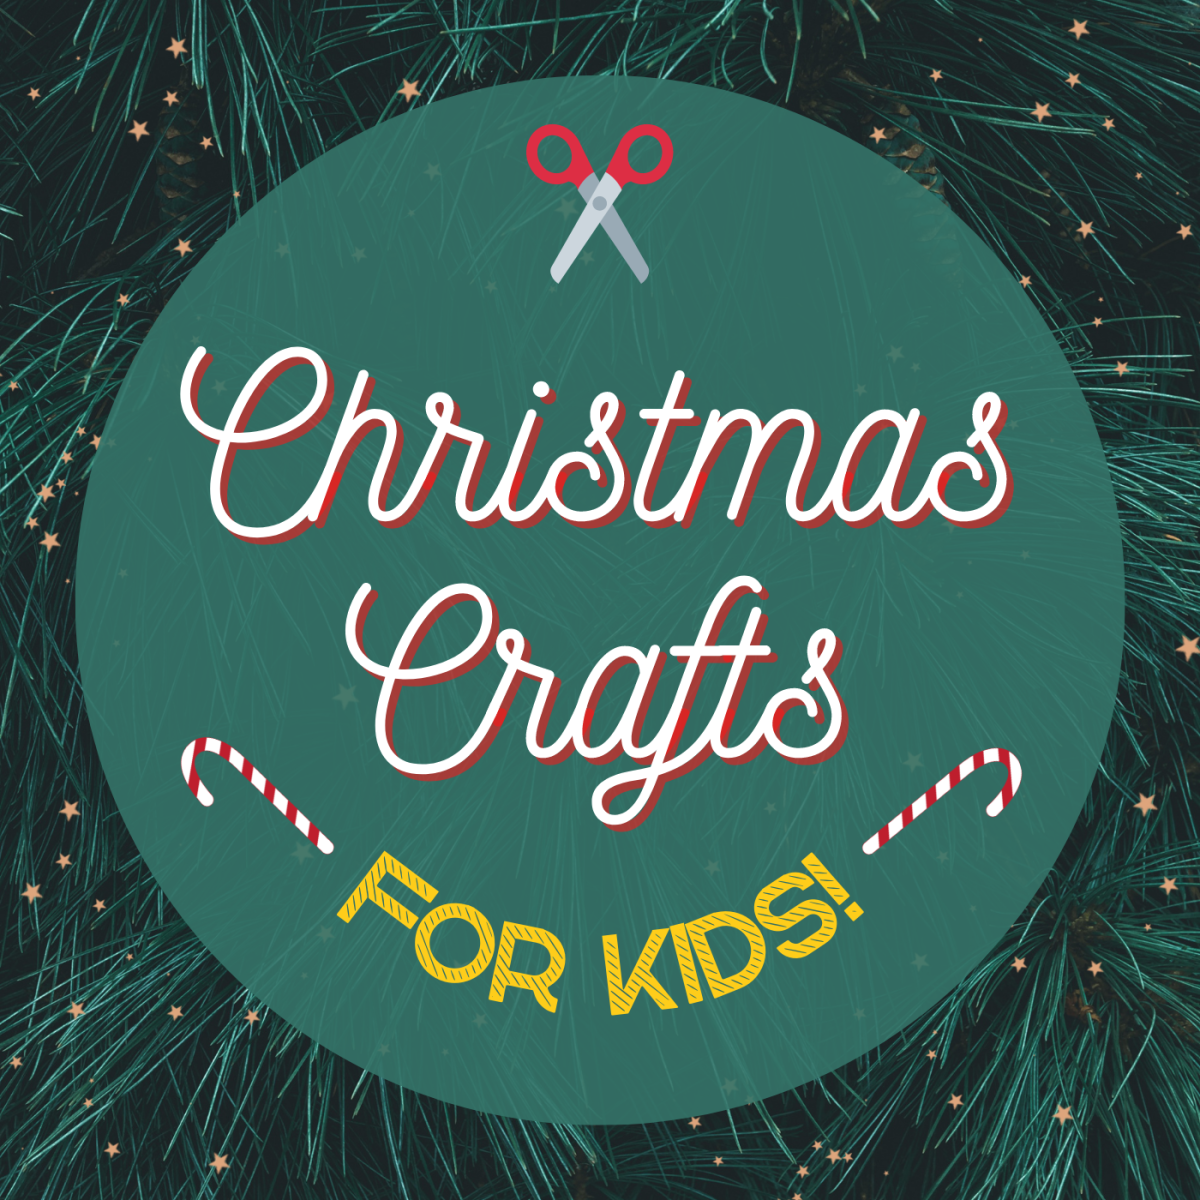 Discover some holiday craft projects you can do with your children!